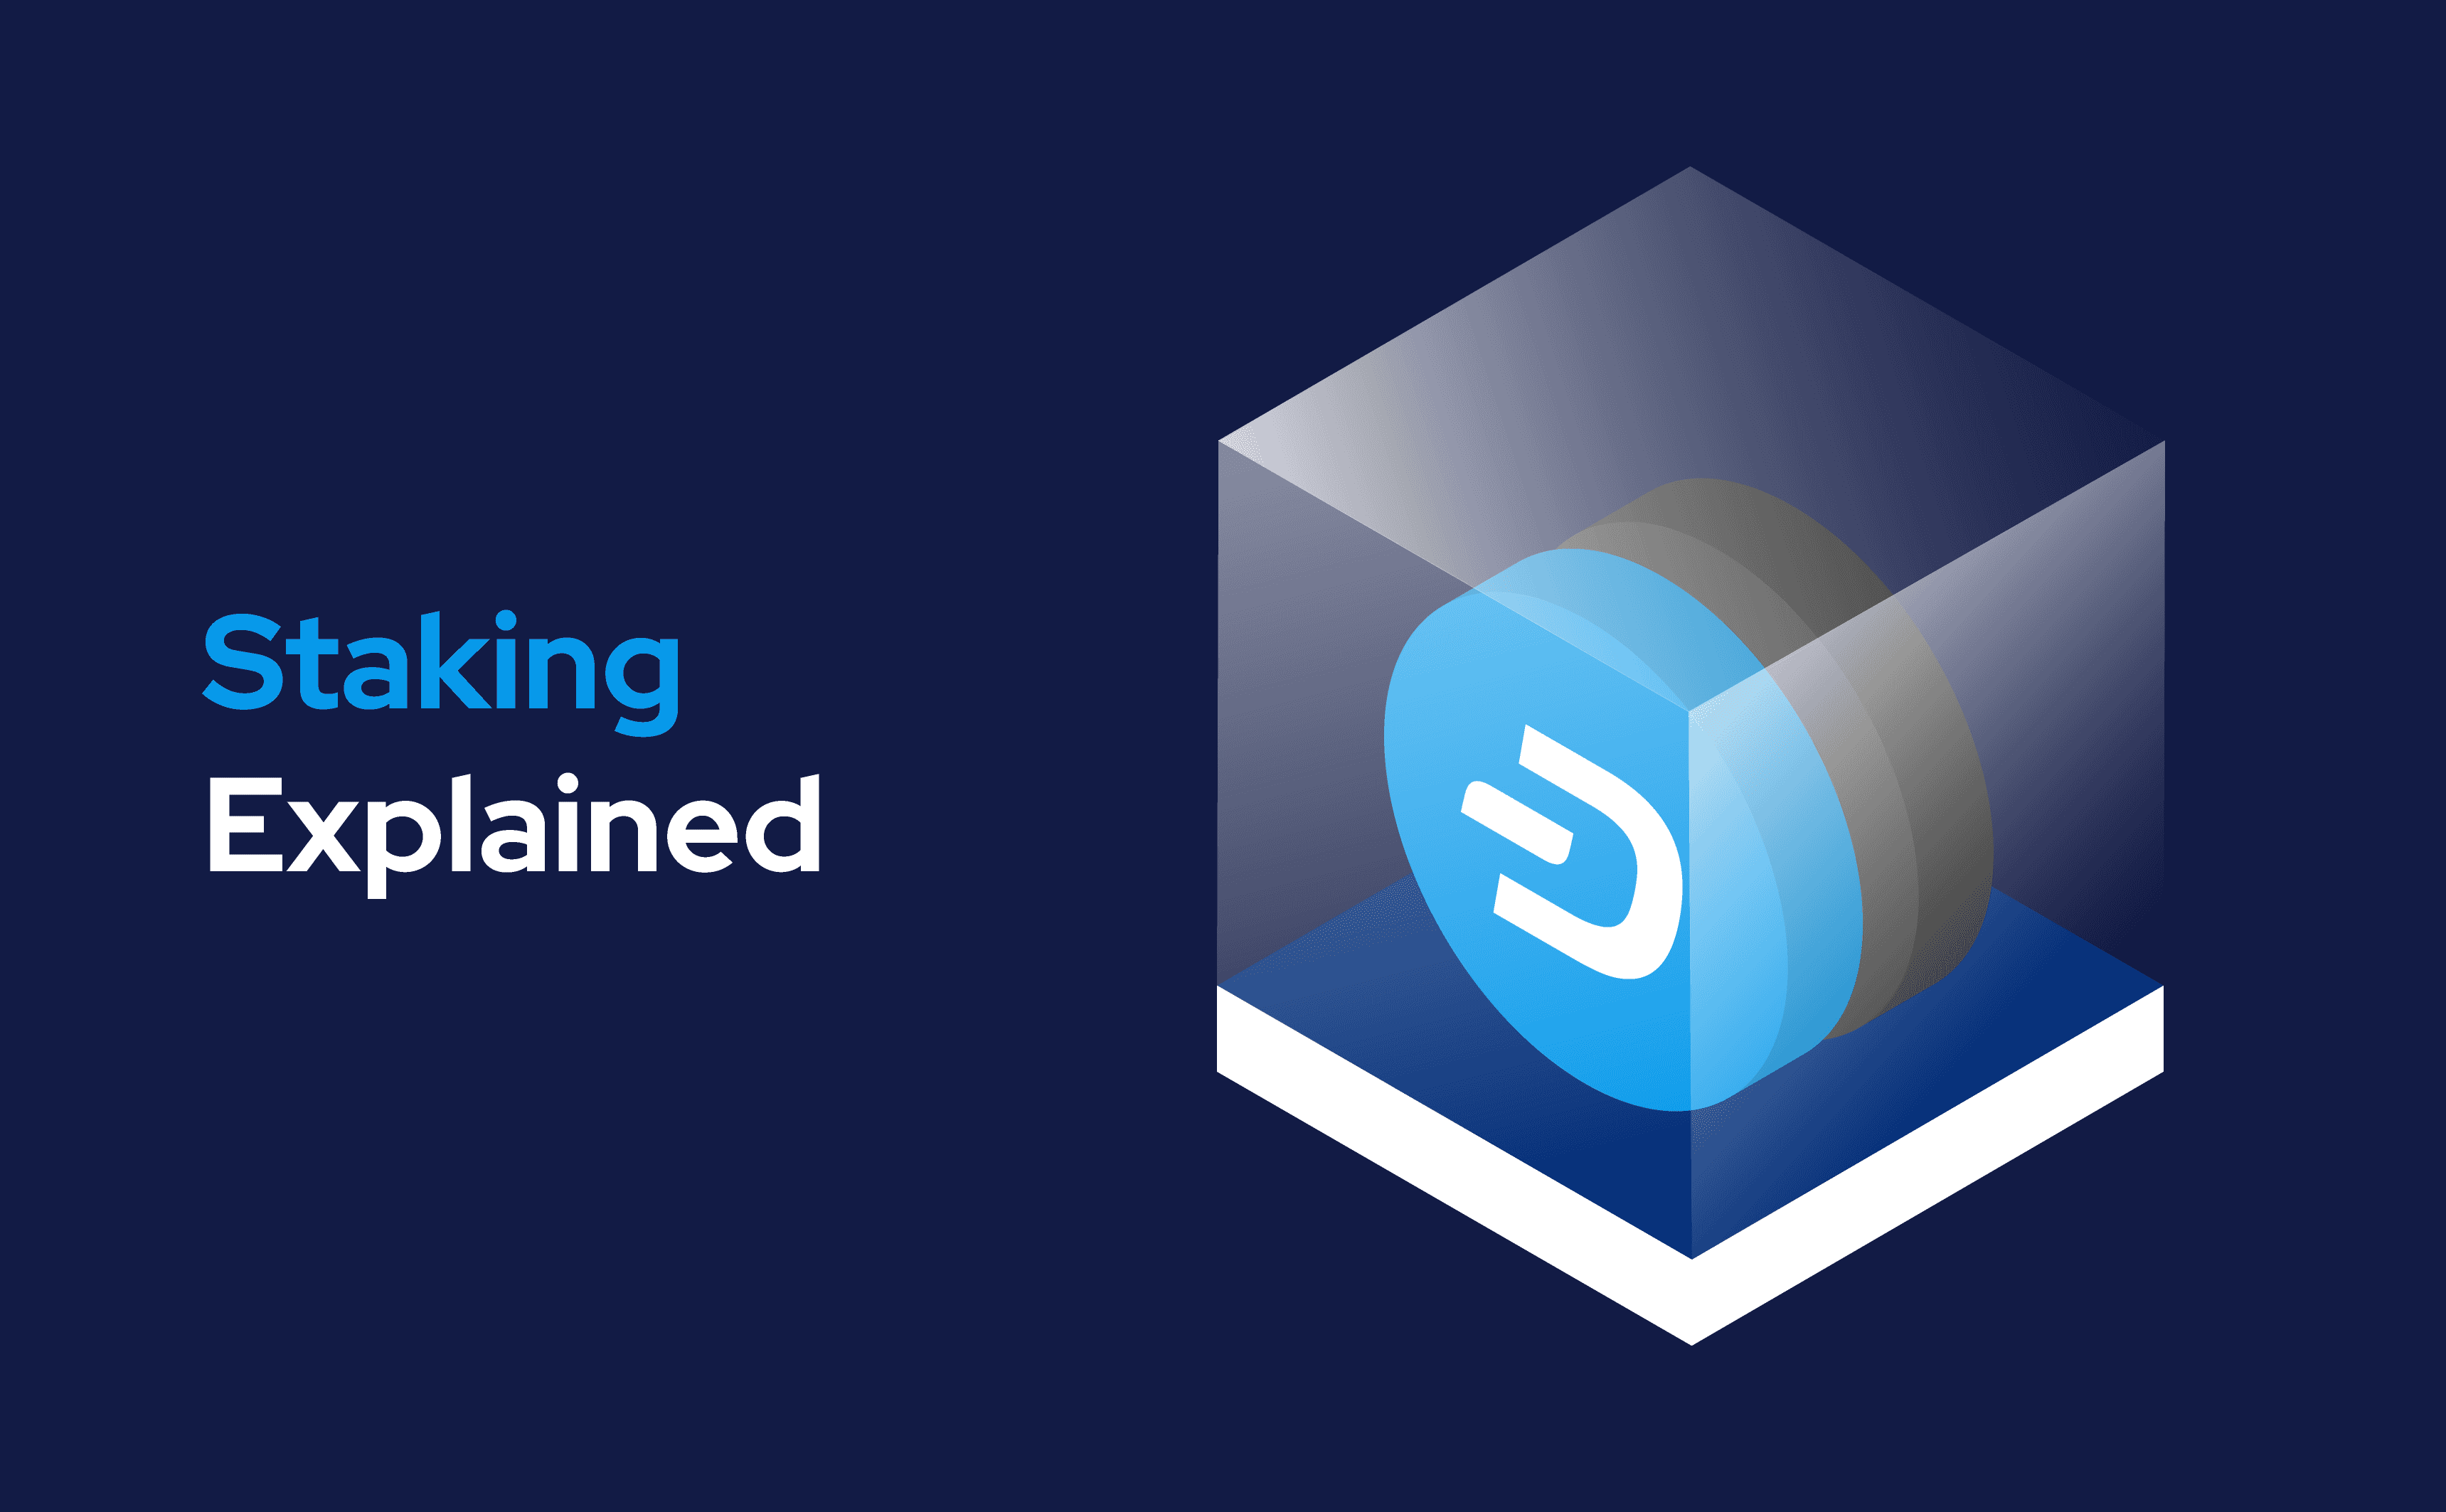 In this blog post, we explain the process of staking.